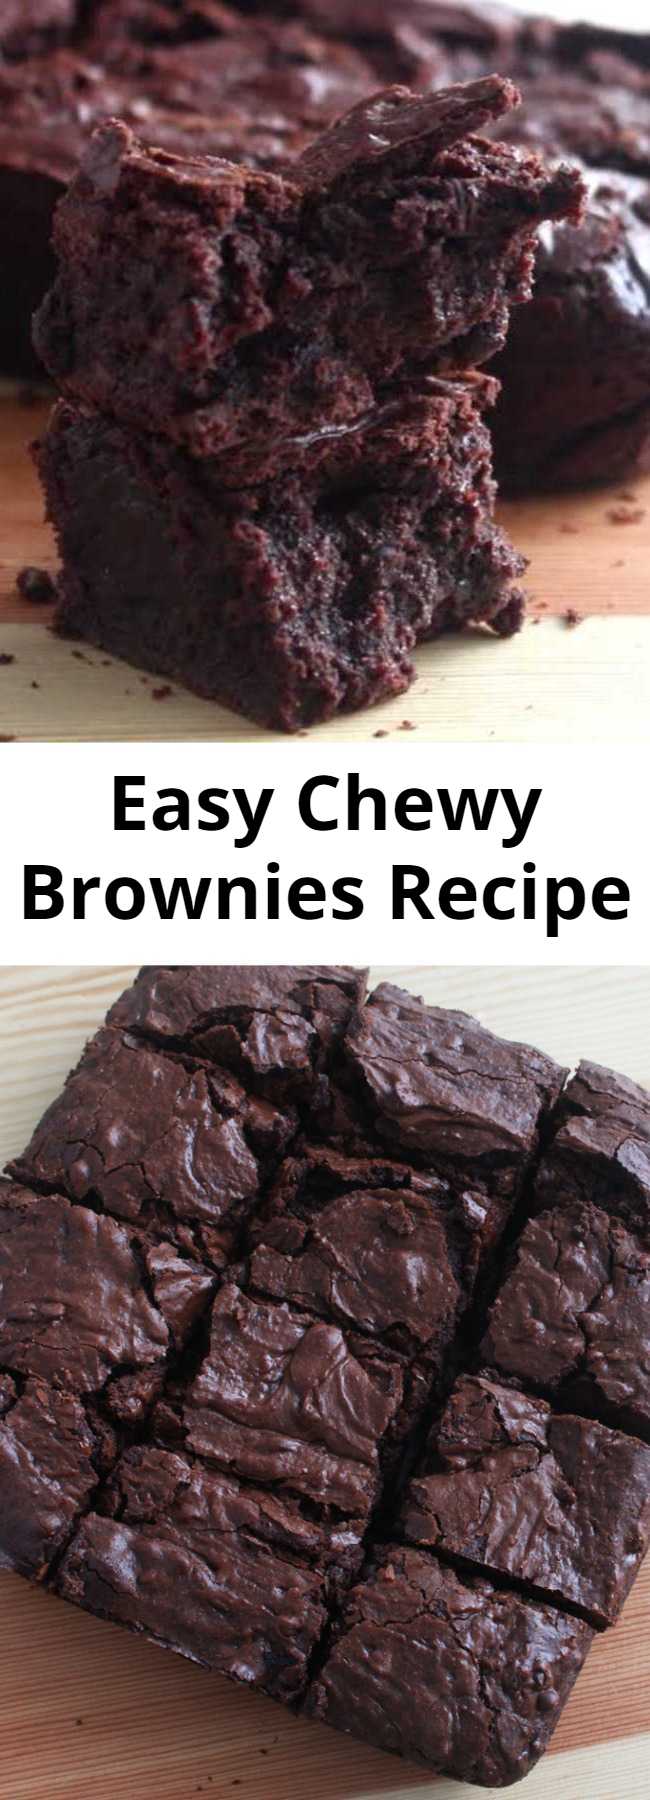 Easy Chewy Brownies Recipe - These are quite possibly the most chewy, moist brownies we've ever made. These brownies are so chewy and moist and perfect for any chocolate craving!